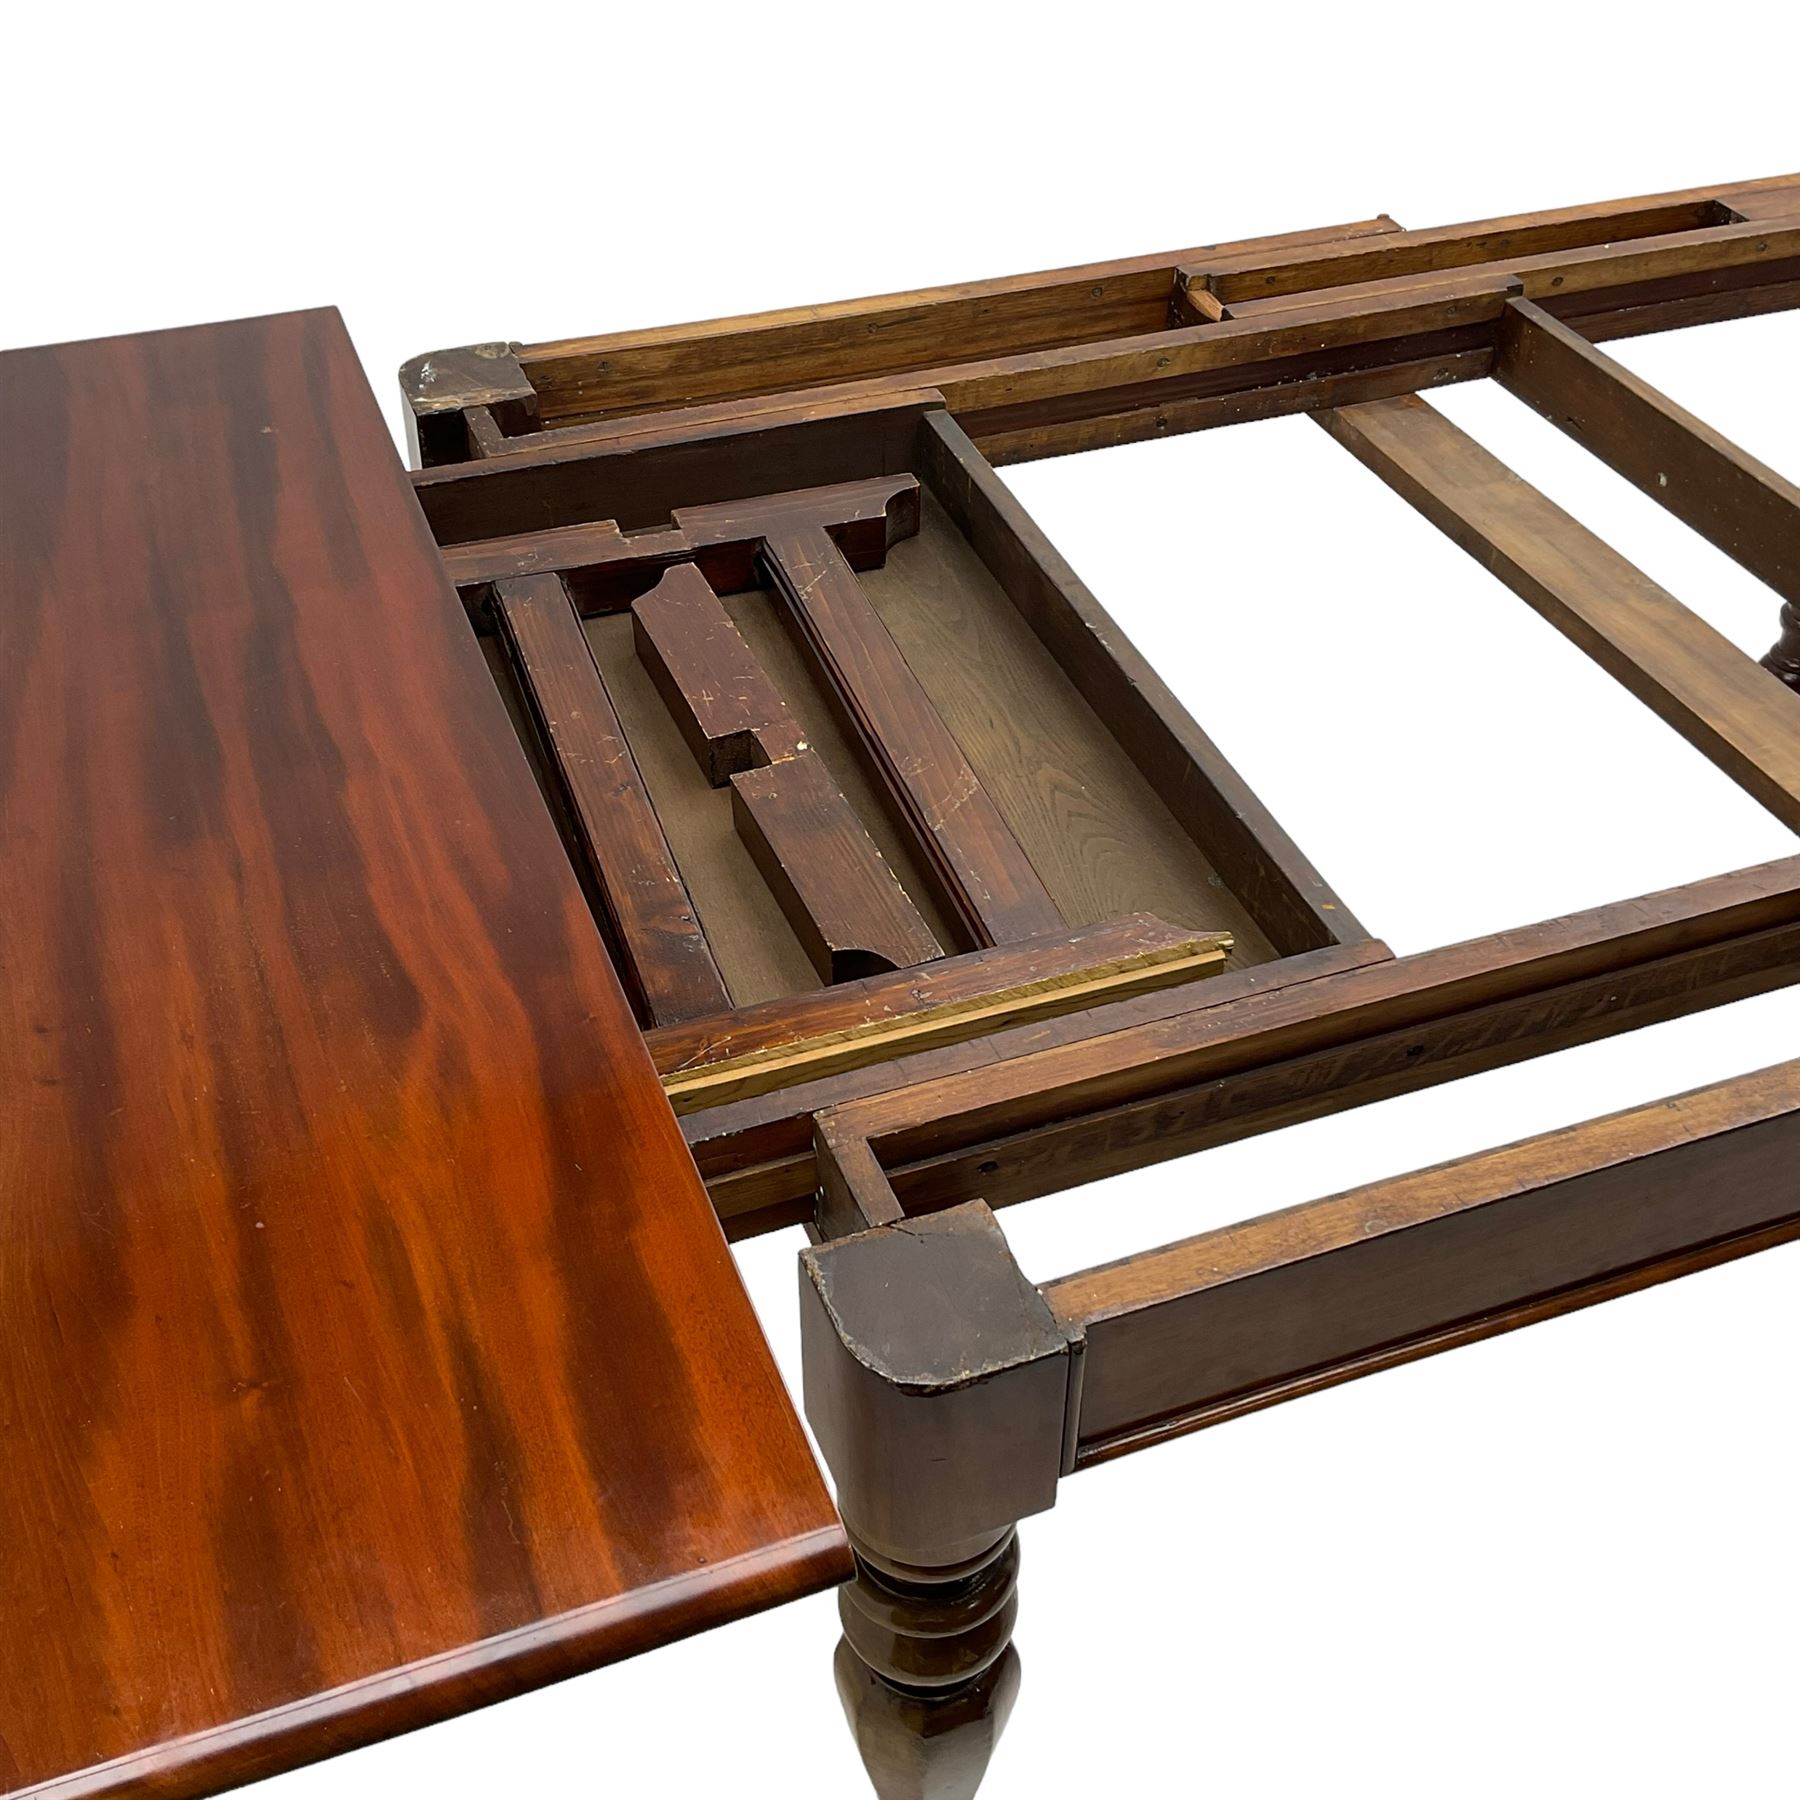 19th century mahogany extending dining table with three additional leaves - Image 14 of 15